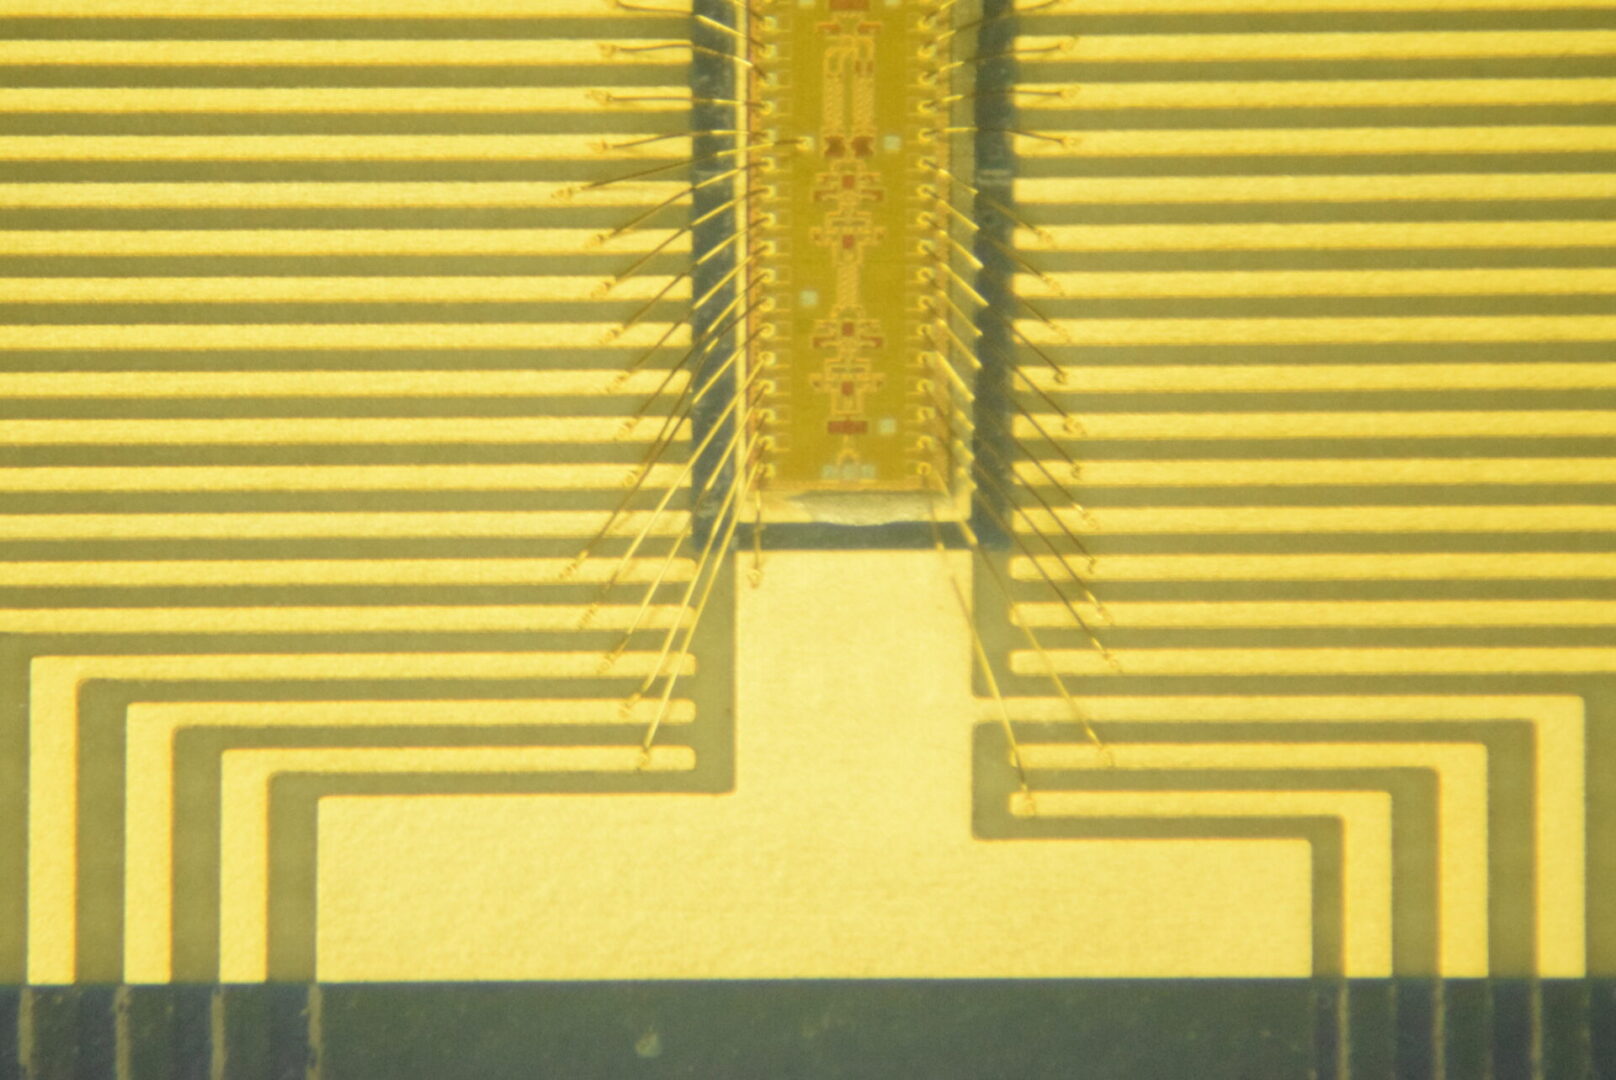 A close up of the side of an electronic device.